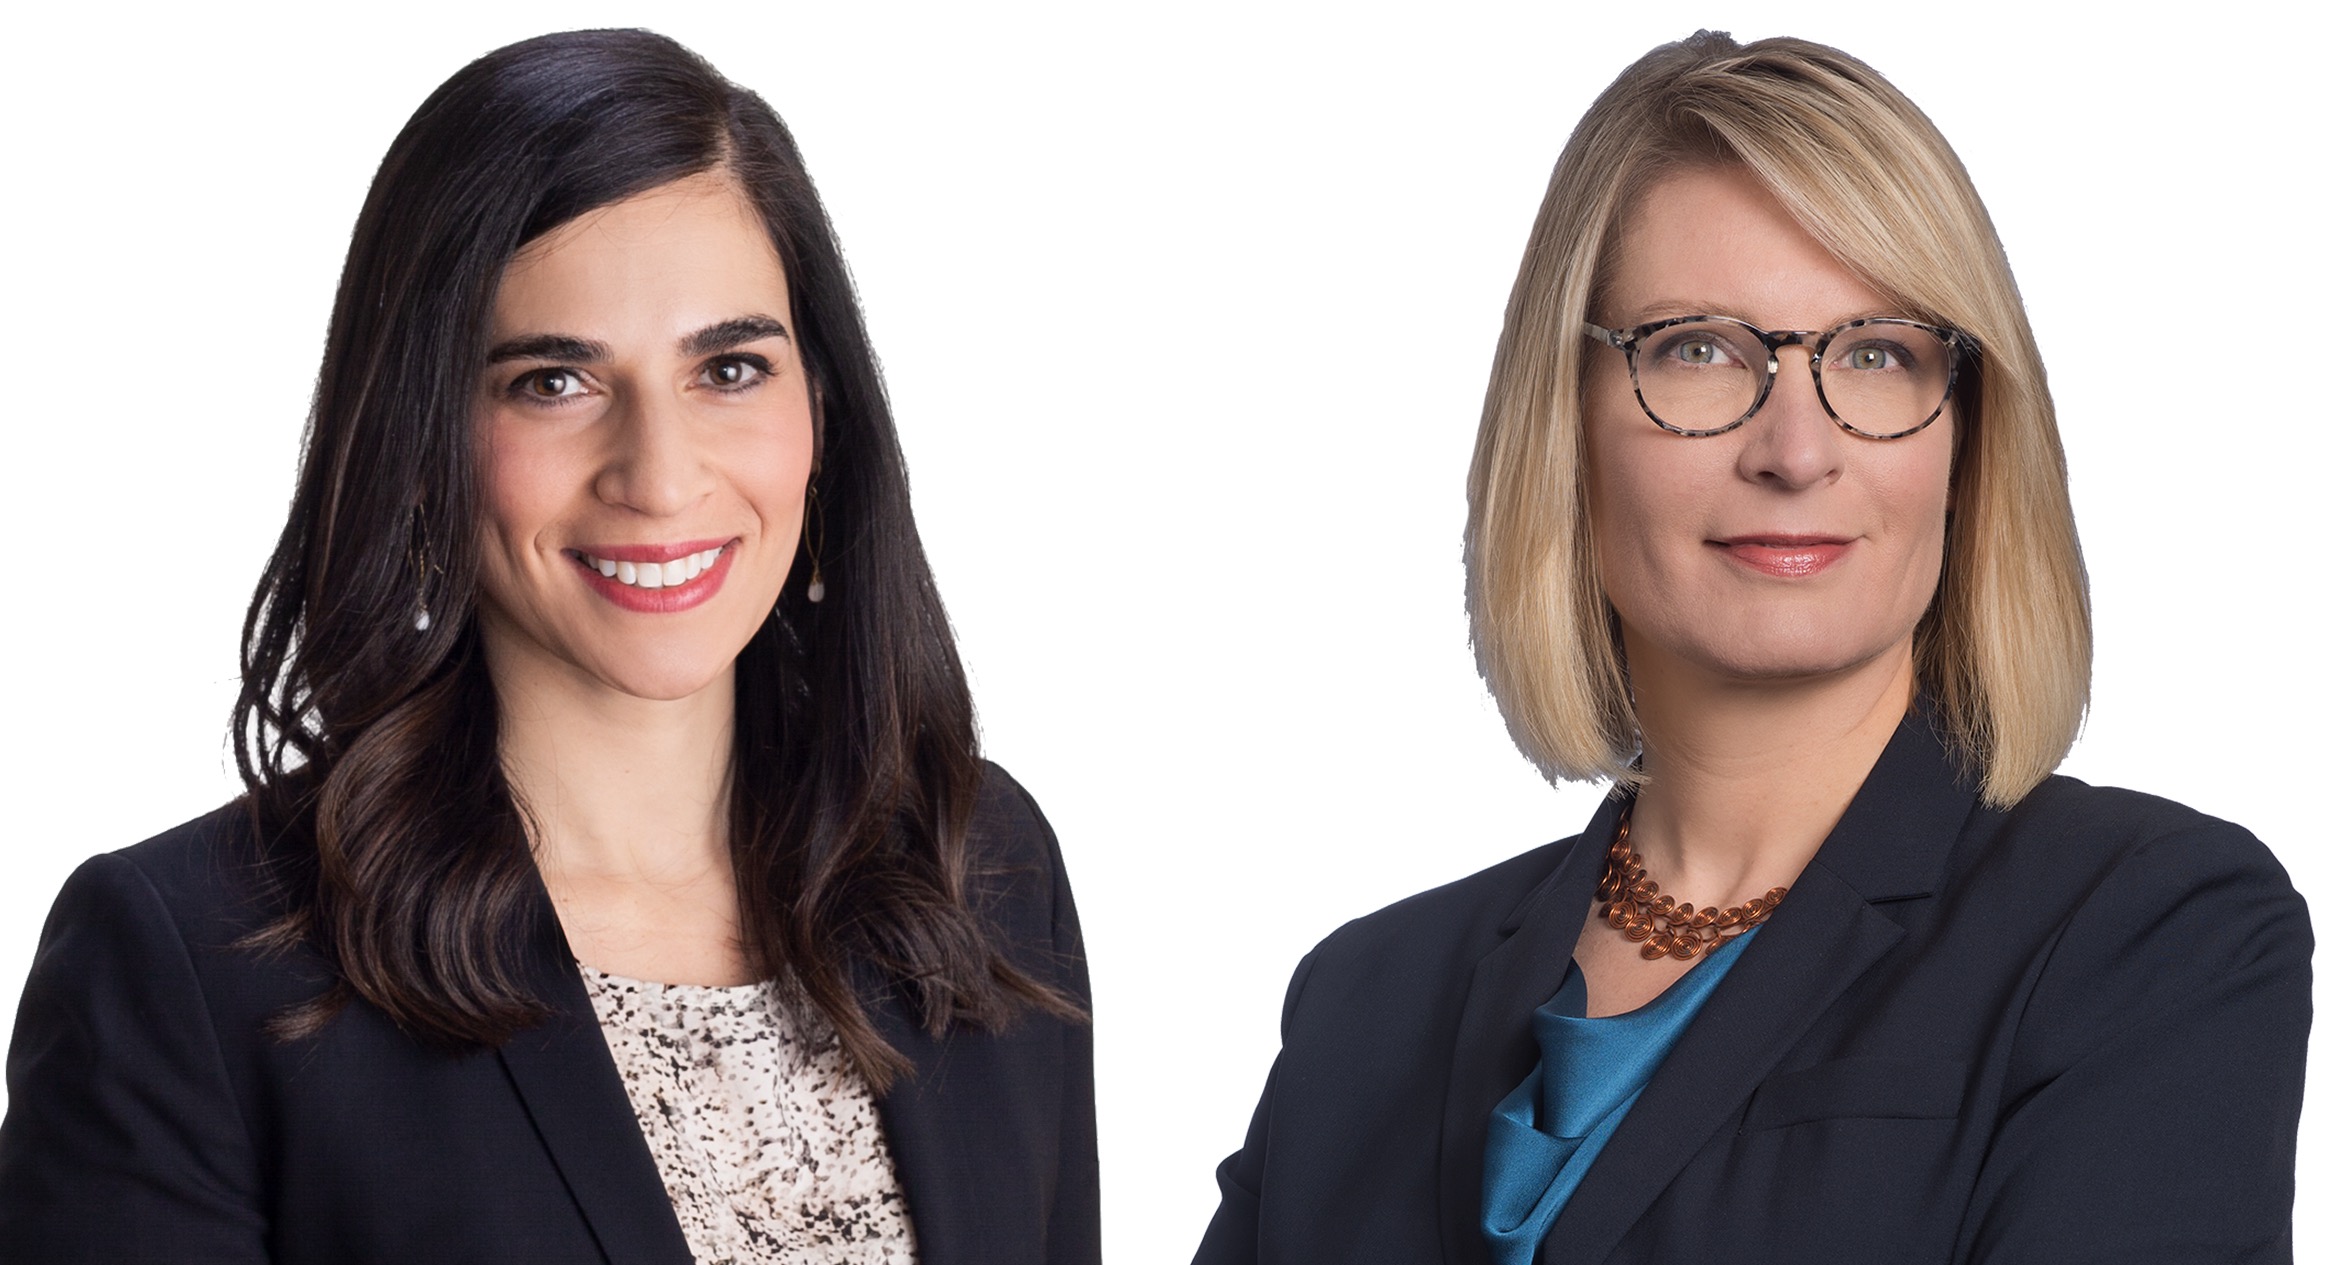 Julie Miceli is a Chicago-based partner with Husch Blackwell LLP, and Anne D. Cartwright is an attorney in Husch Blackwell LLP's Kansas City office.